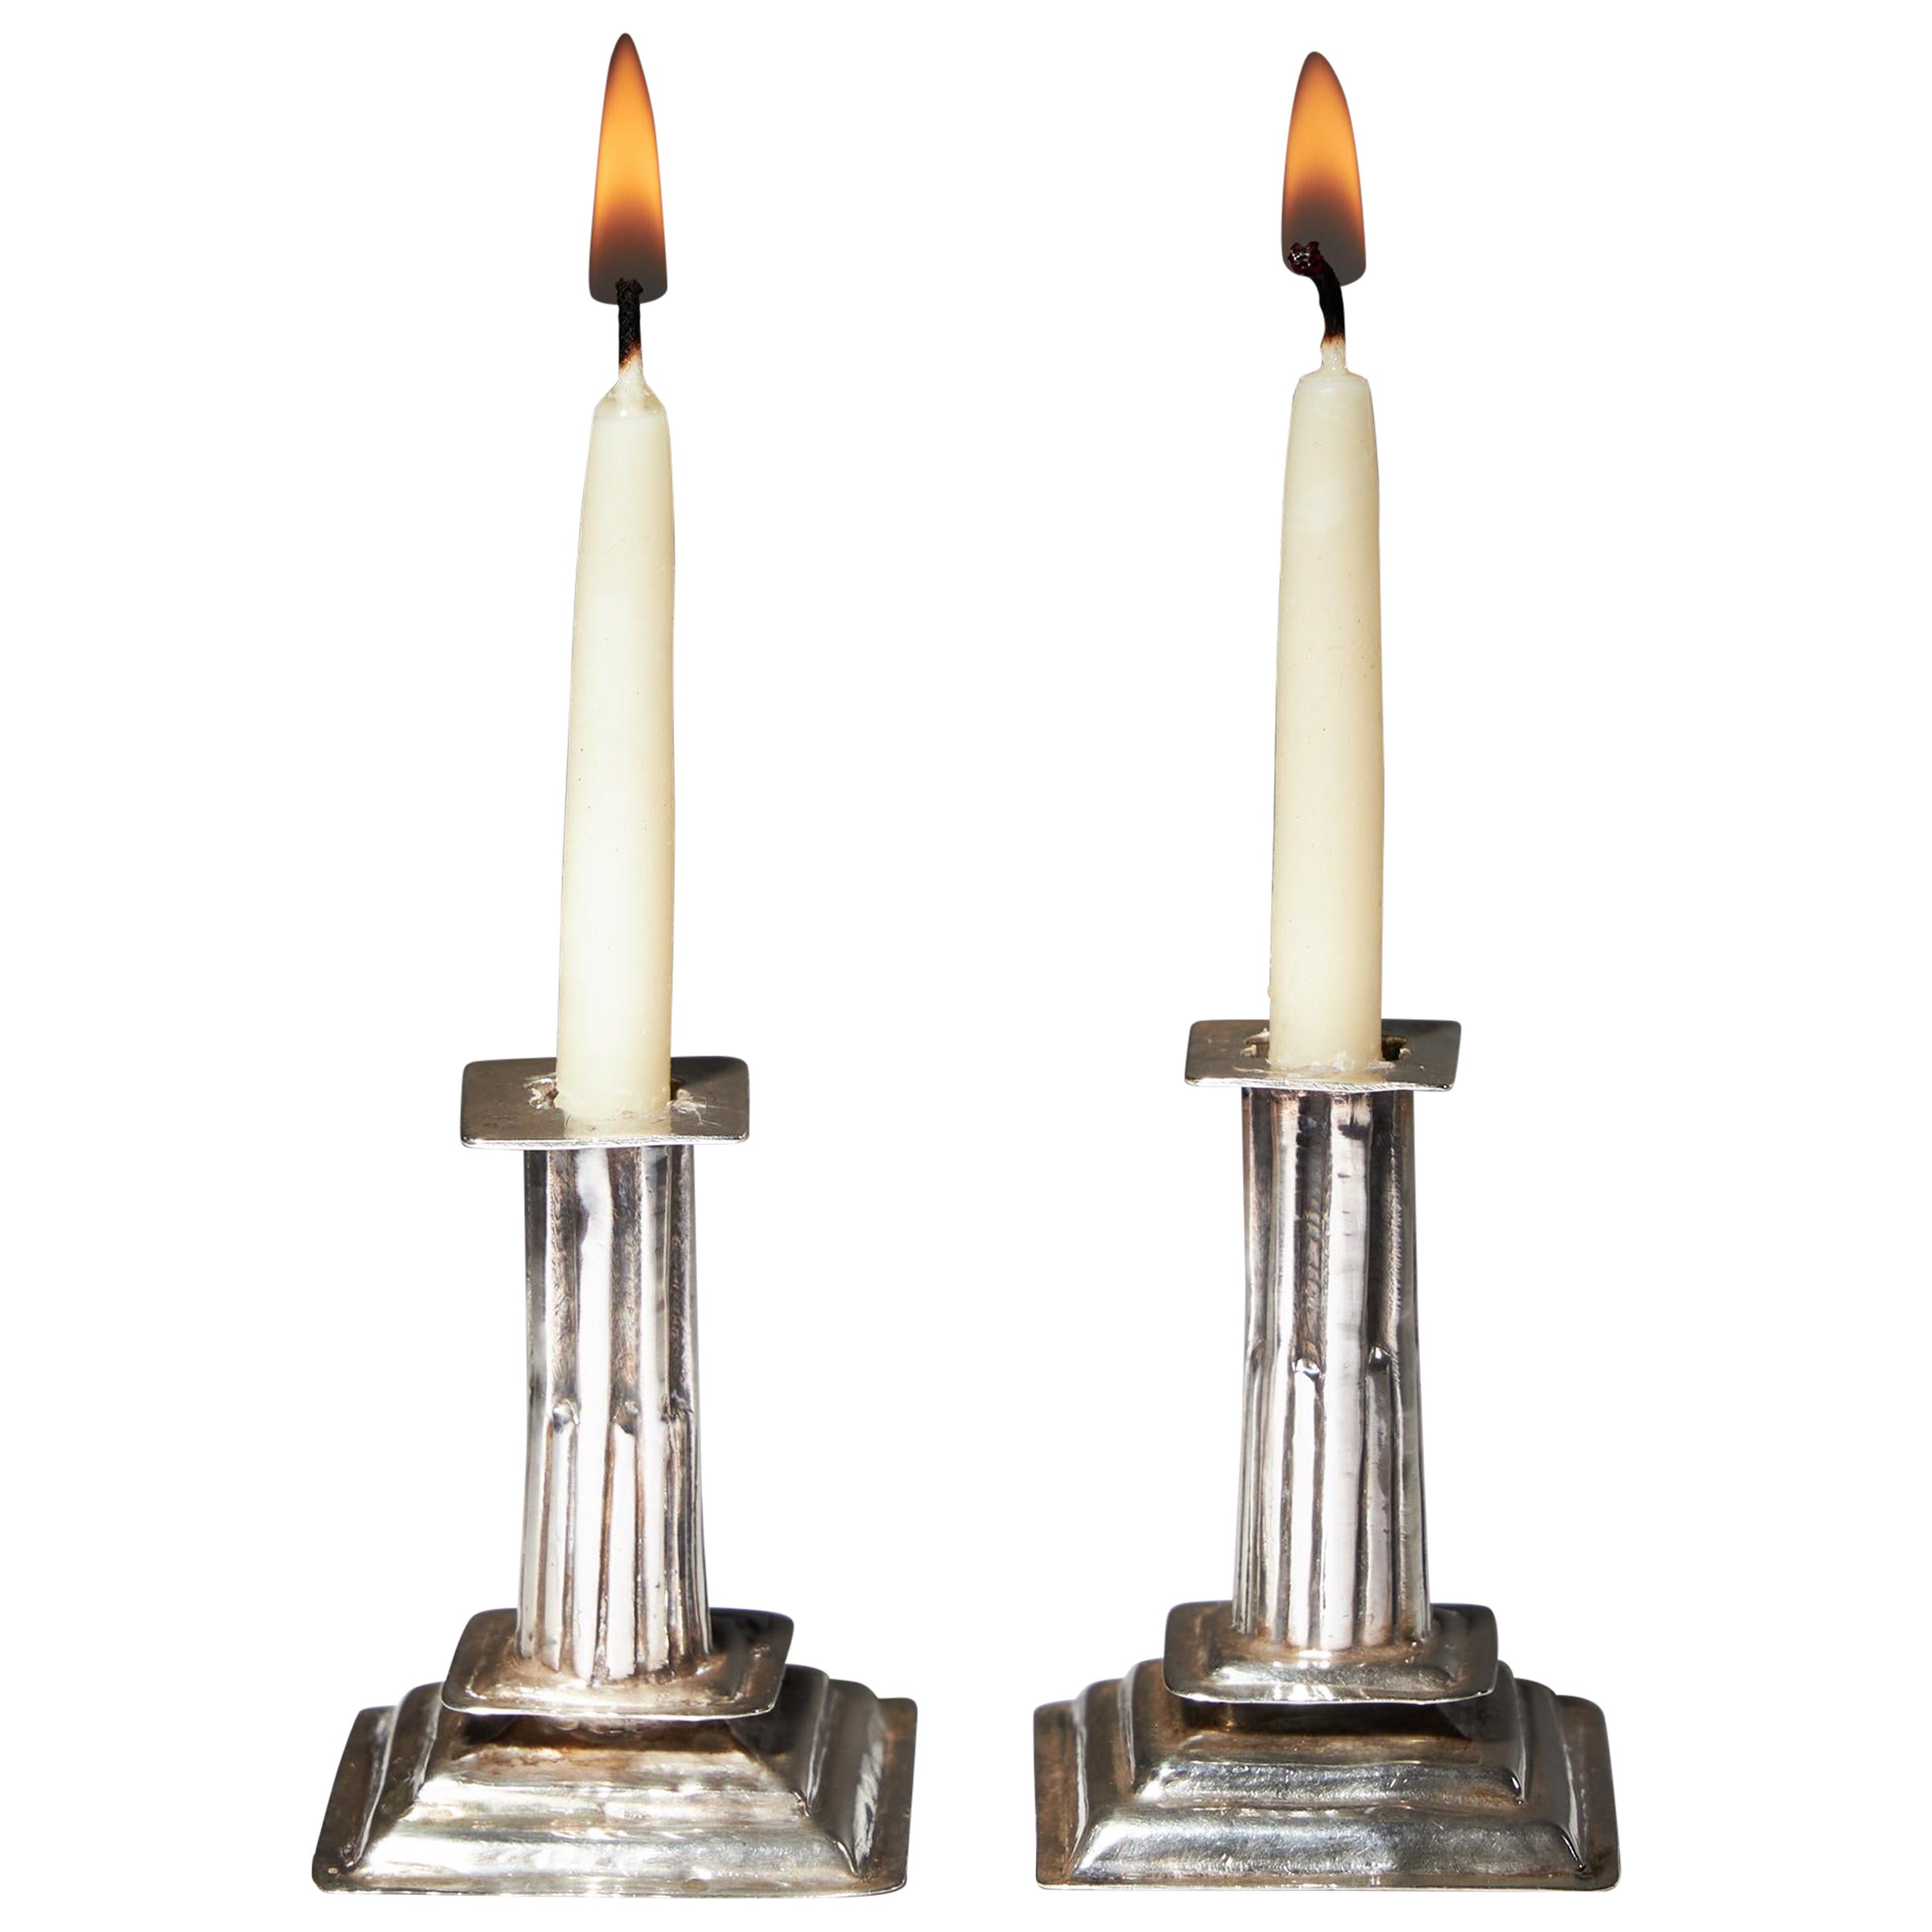 A Pair of 17th Century William and Mary Miniature Candlesticks By George Manjoy For Sale